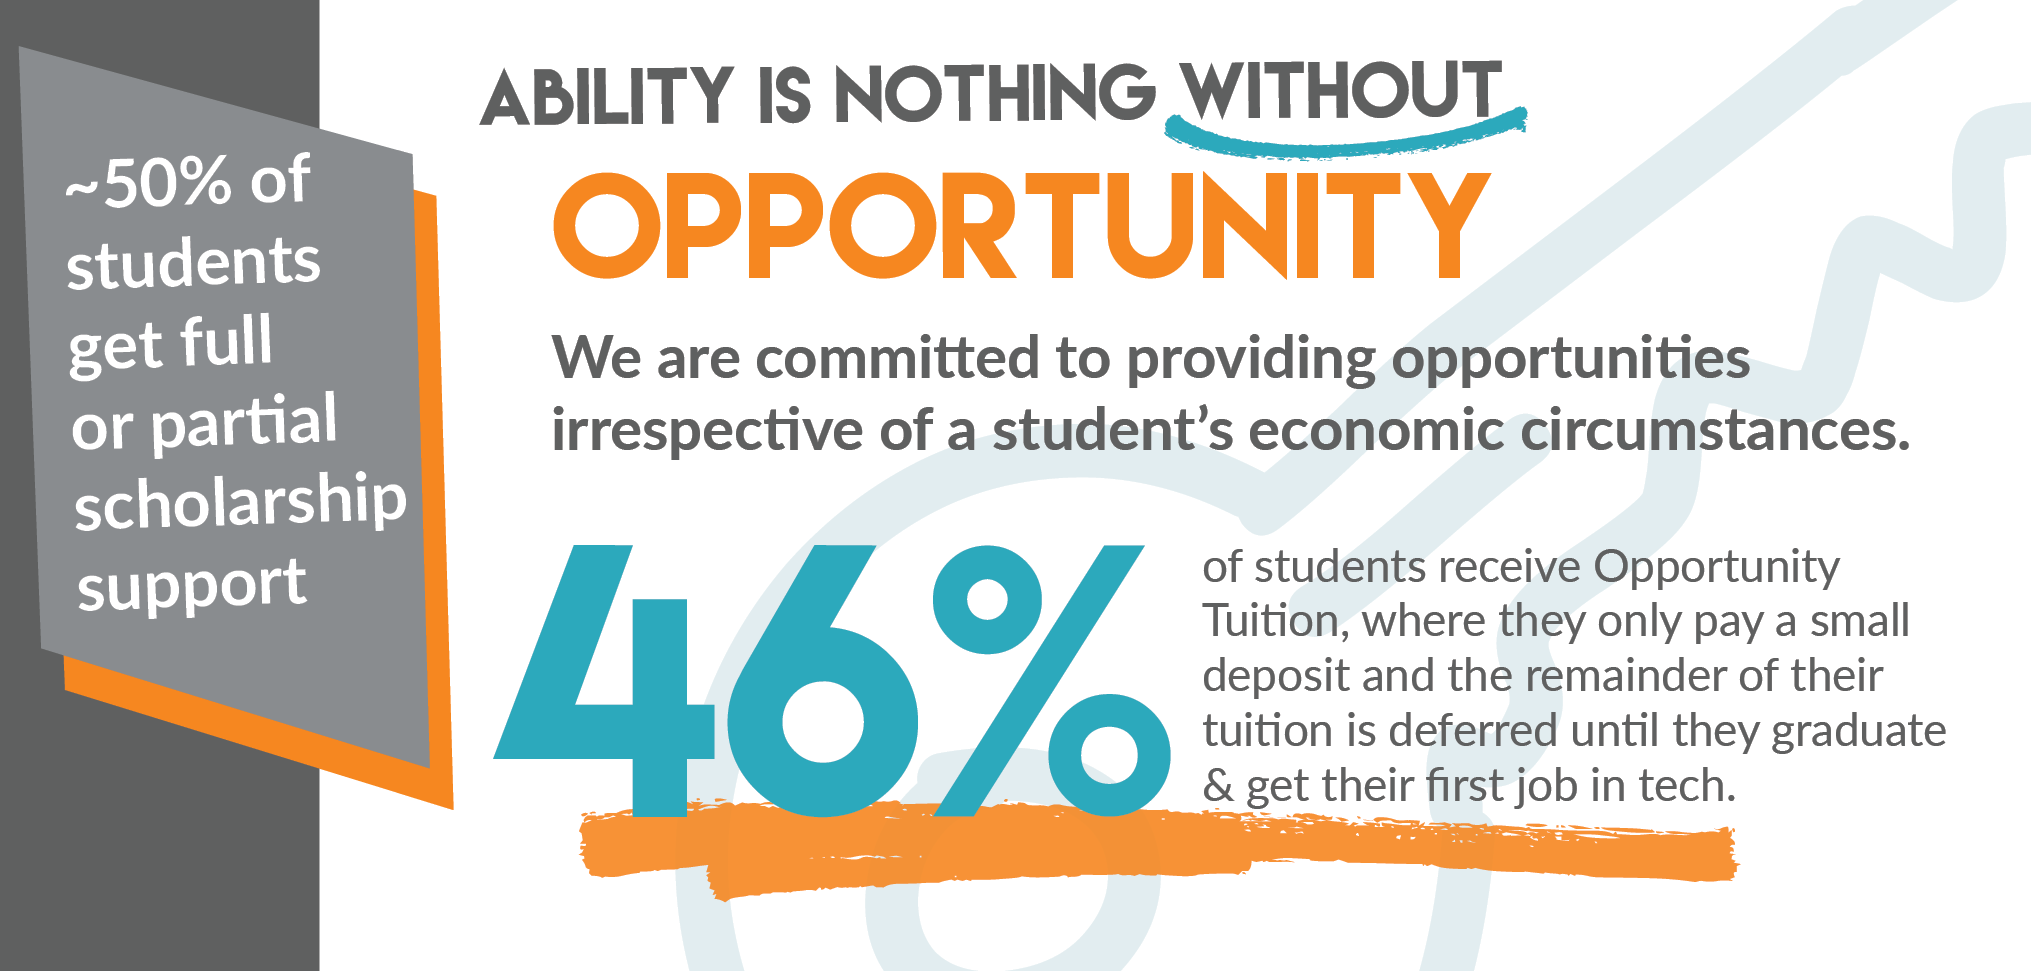 Ability is nothing without opportunity - approximately 50% of students get full or partial scholarship support